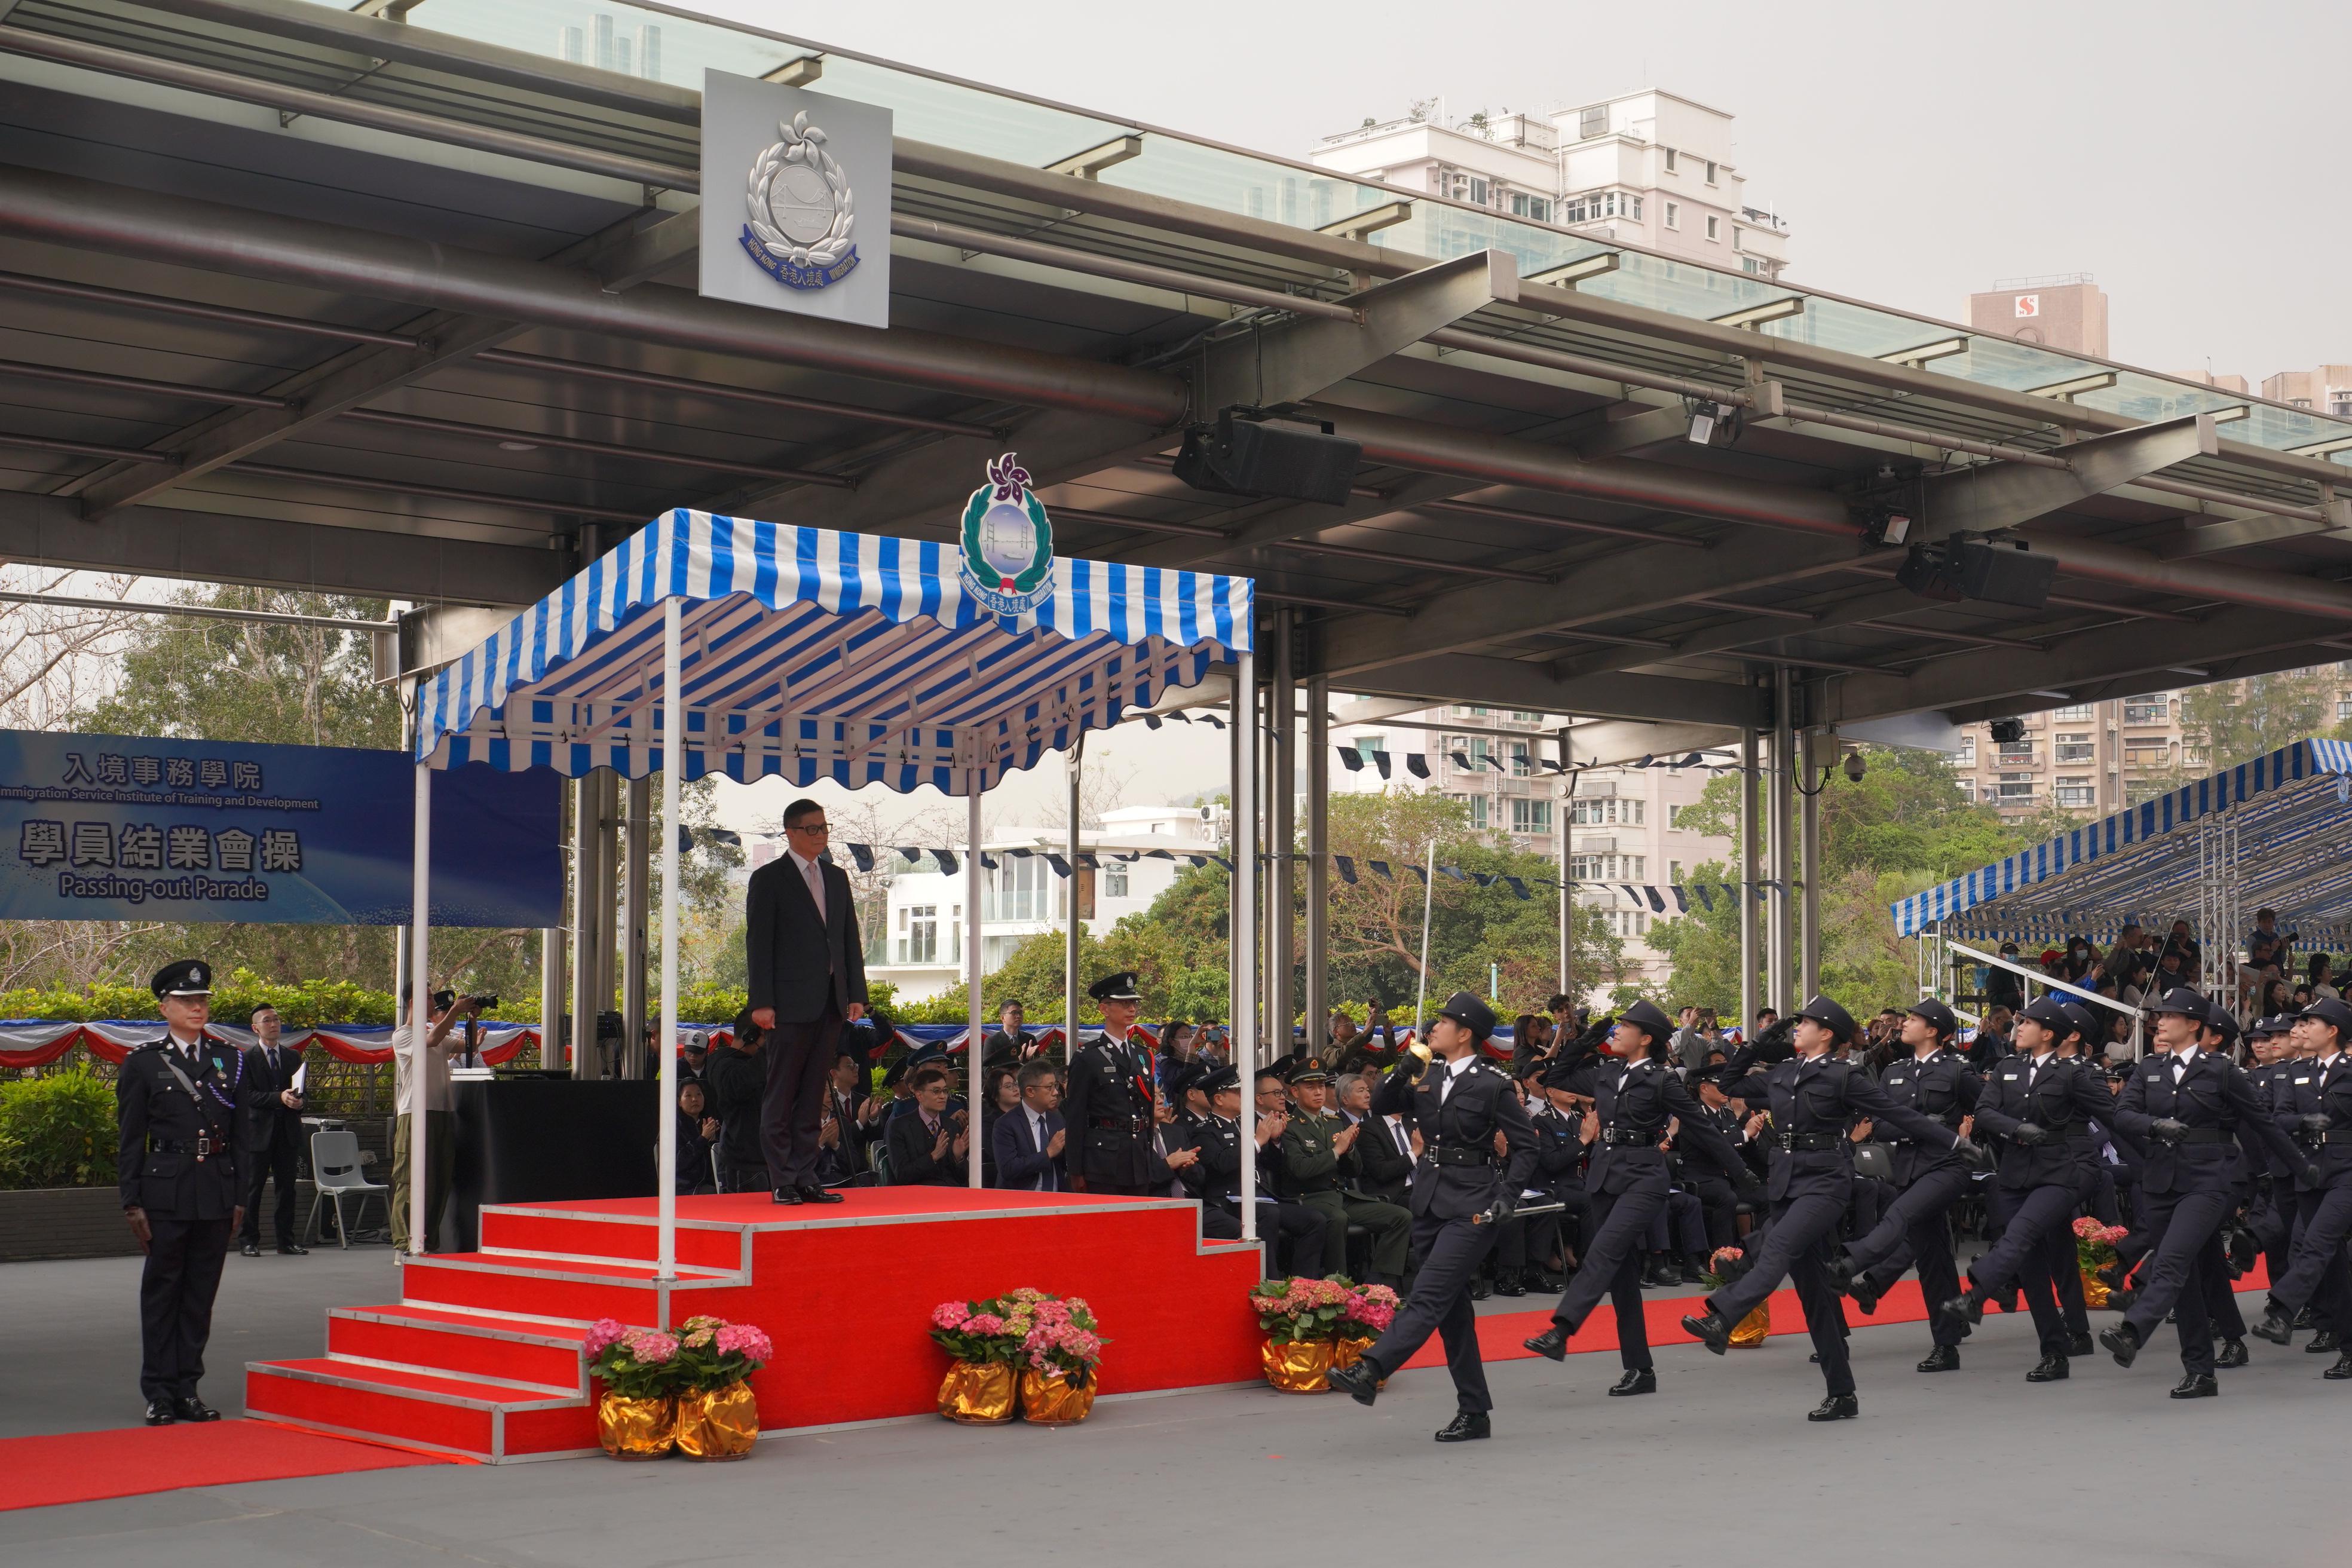 The Immigration Service Institute of Training and Development Passing-out Parade was held today (March 15). Photo shows passing-out officers marching past the dais in the Chinese-style footdrill performance.